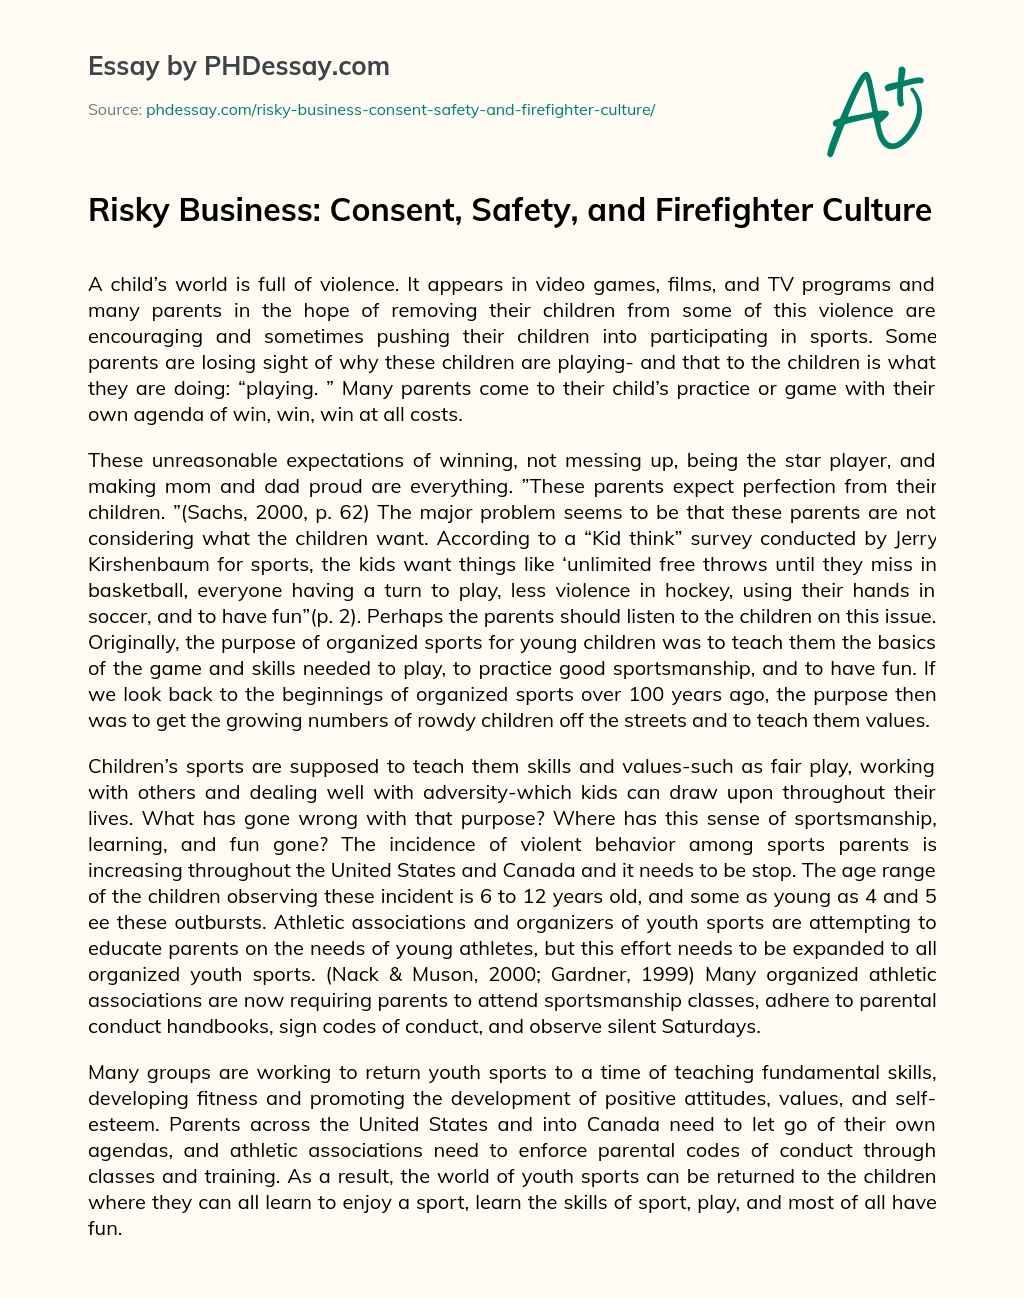 Risky Business: Consent, Safety, and Firefighter Culture essay